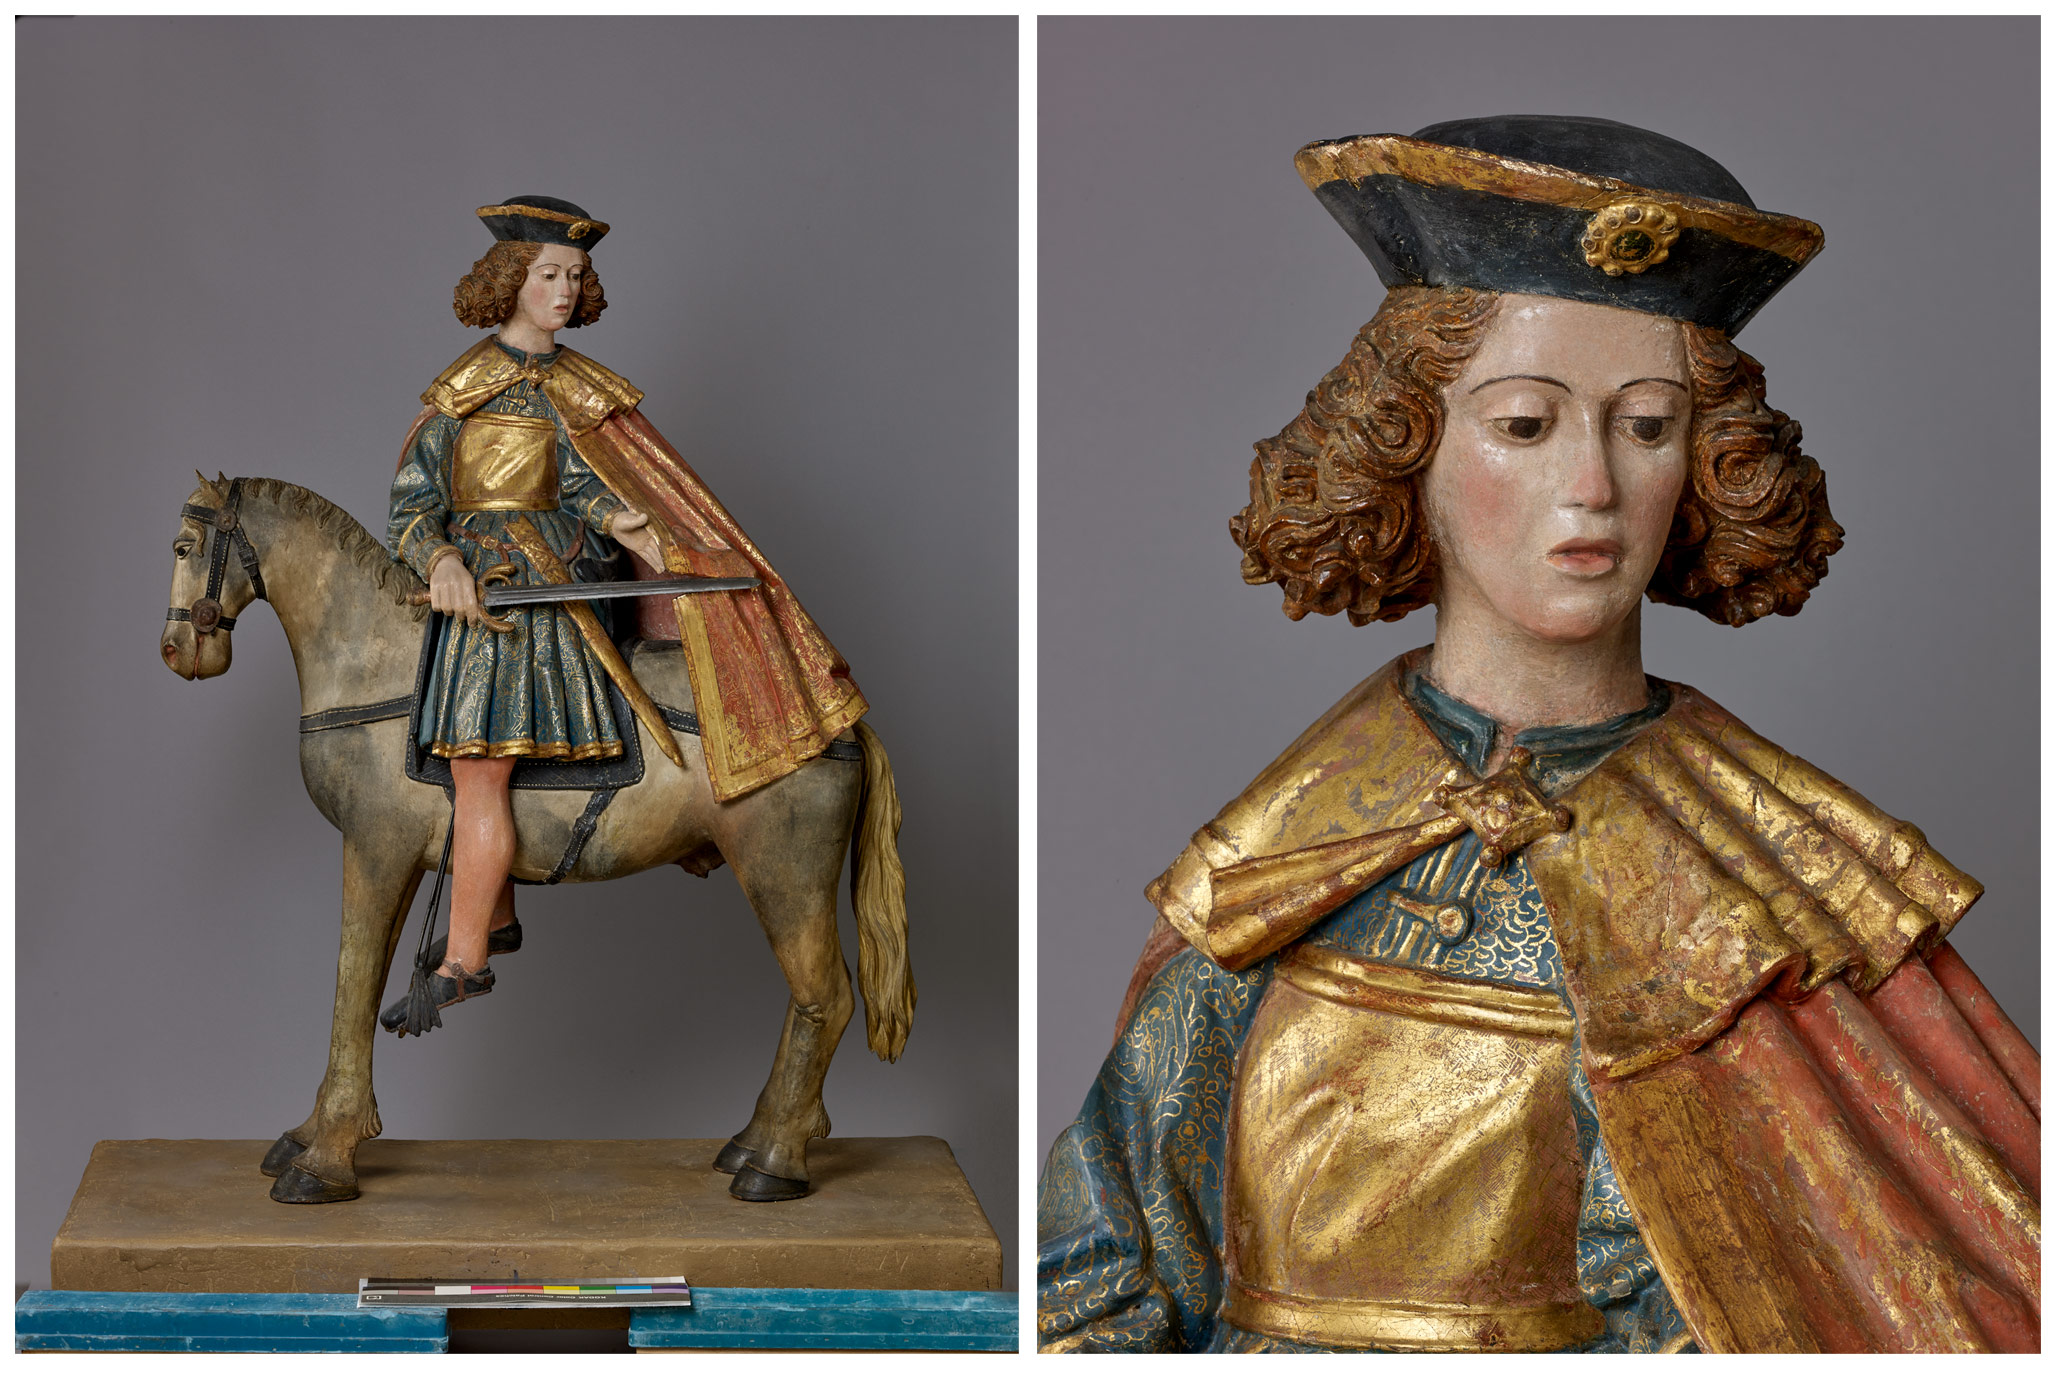 A Glorious Glimpse at the Hispanic Society’s Collection